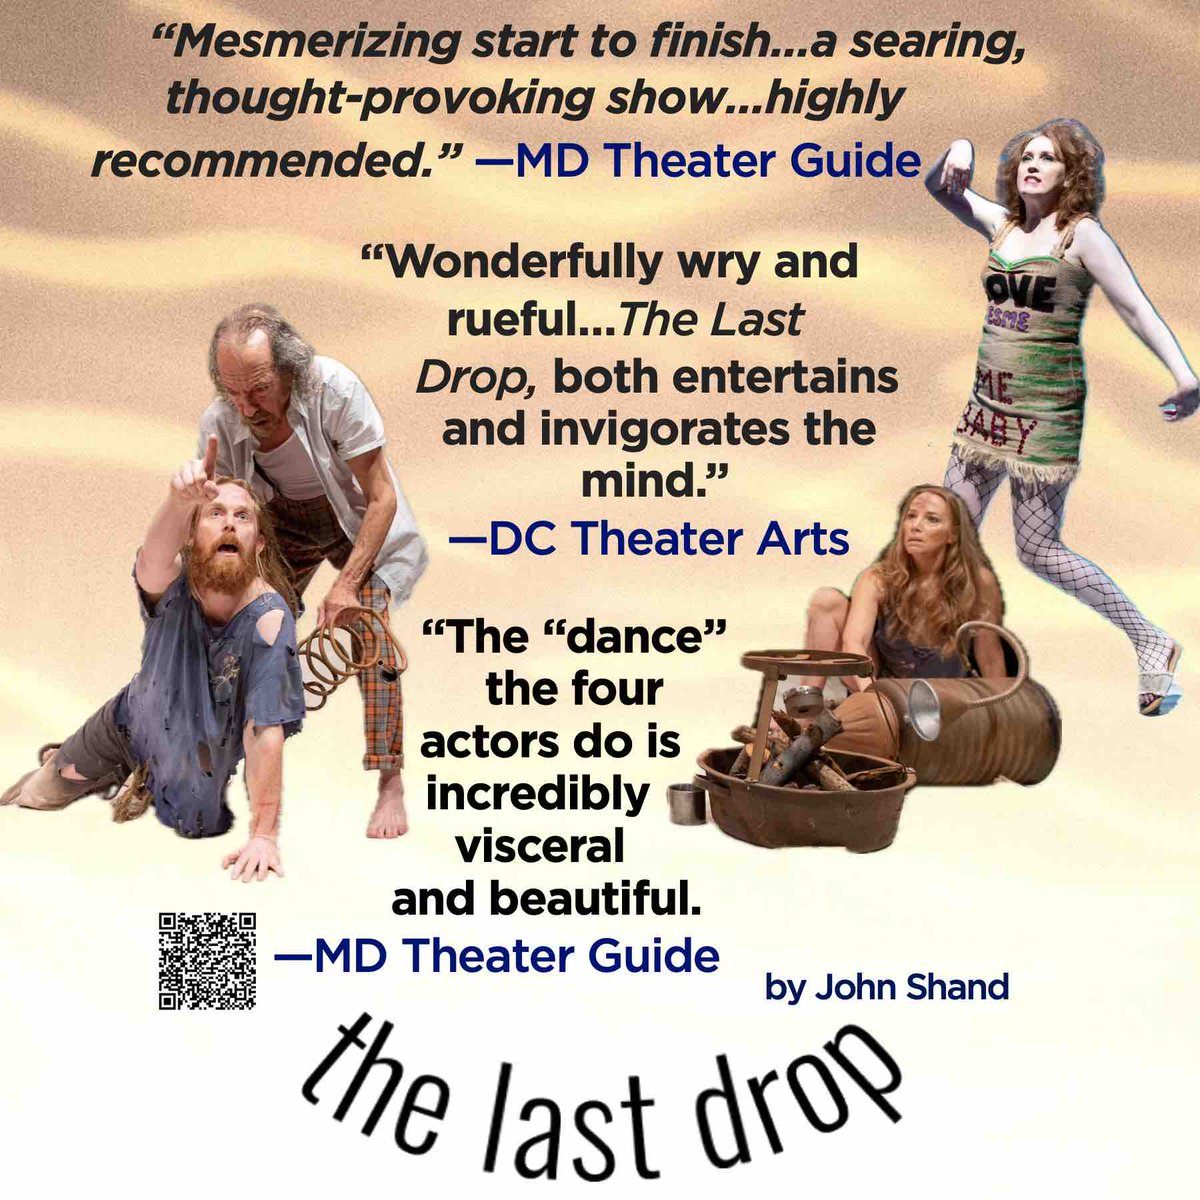 scenatheatre
Early reviews of “The Last Drop” by @JohnRShand are GUSHING! See an intense play about the ravaging effects of #climate damage and the human reactions! Written Directed by Robert McNamara. Tickets: ScenaTheatre.org #climateaction #dcentertainment  #dctheatre